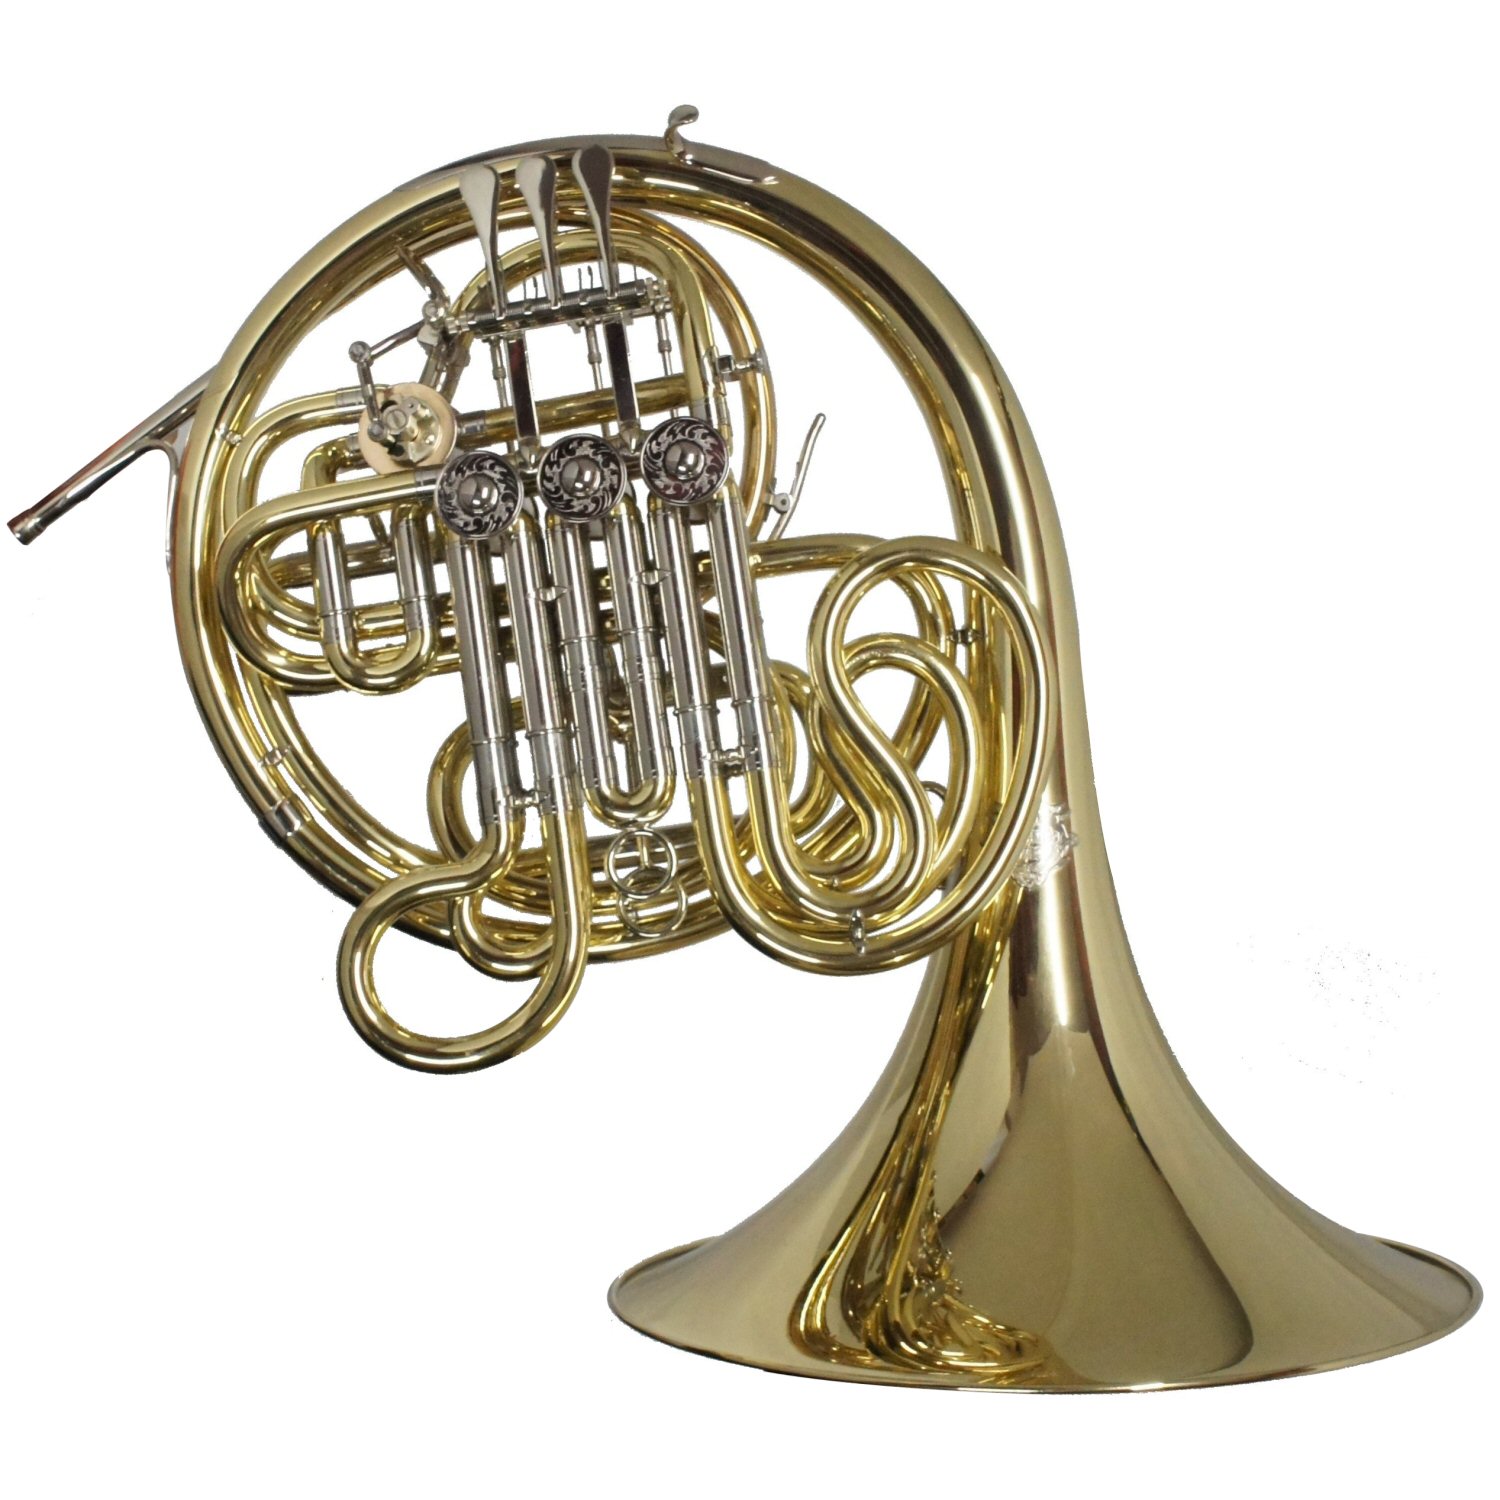 Second Hand Alexander 103 French Horn